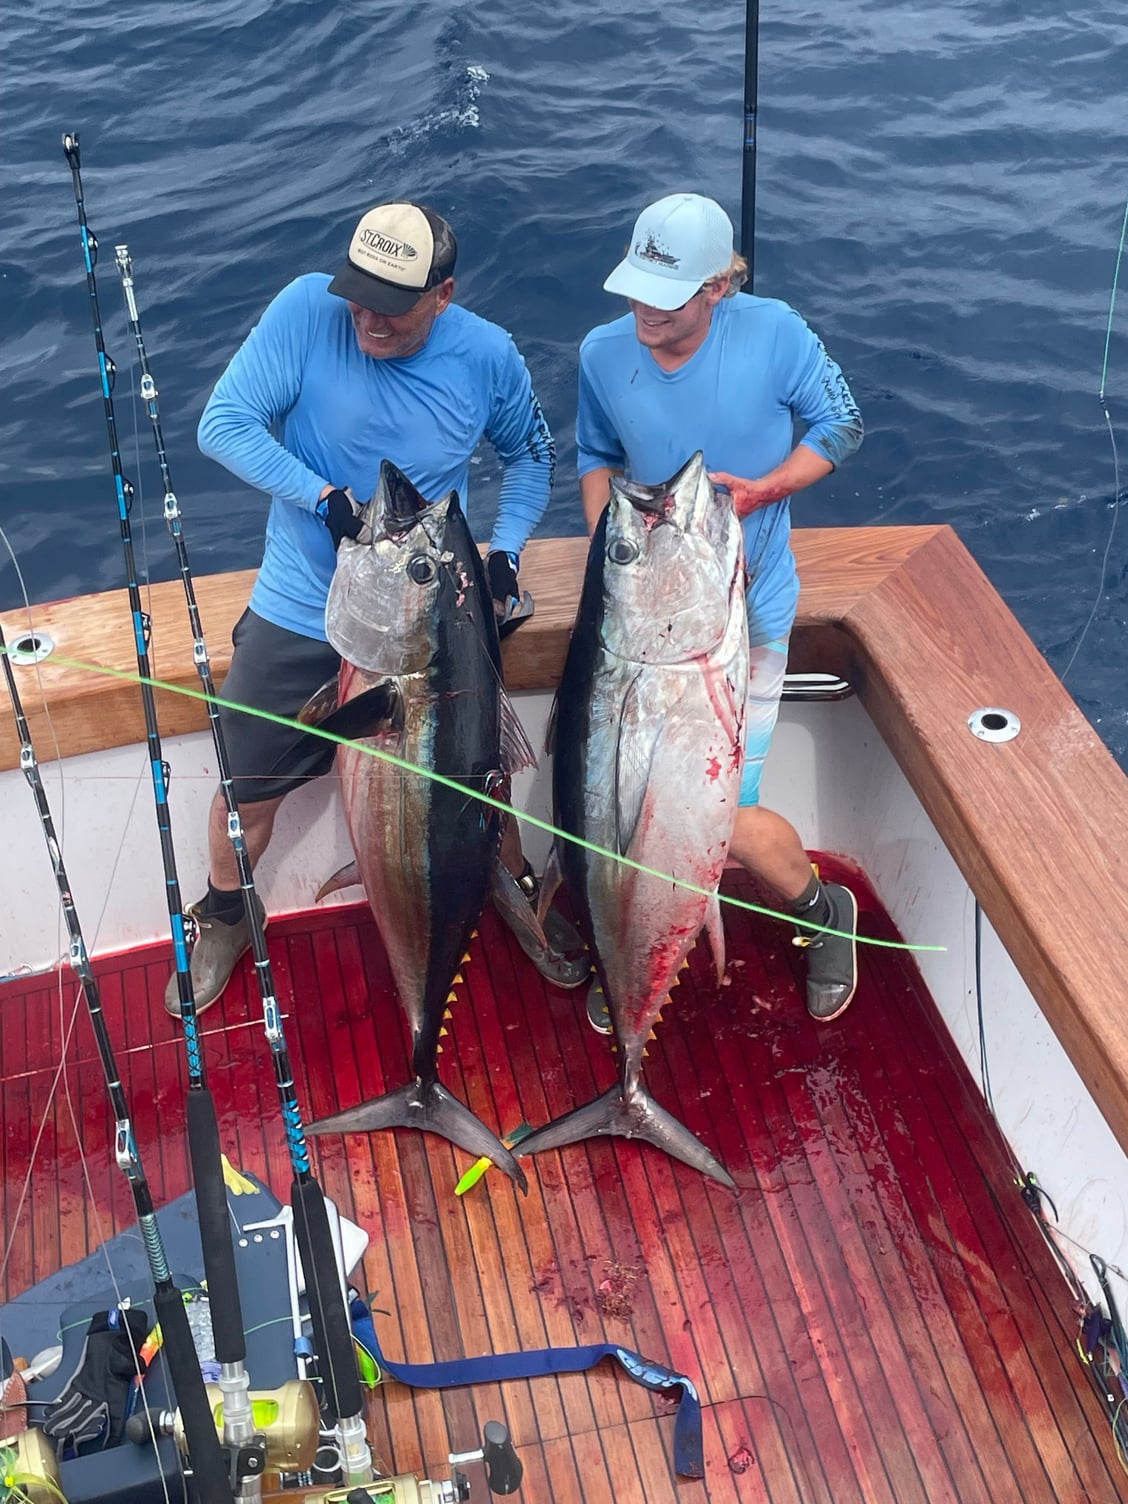 What is the best way to catch big eye tuna on the surface - The Hull Truth  - Boating and Fishing Forum